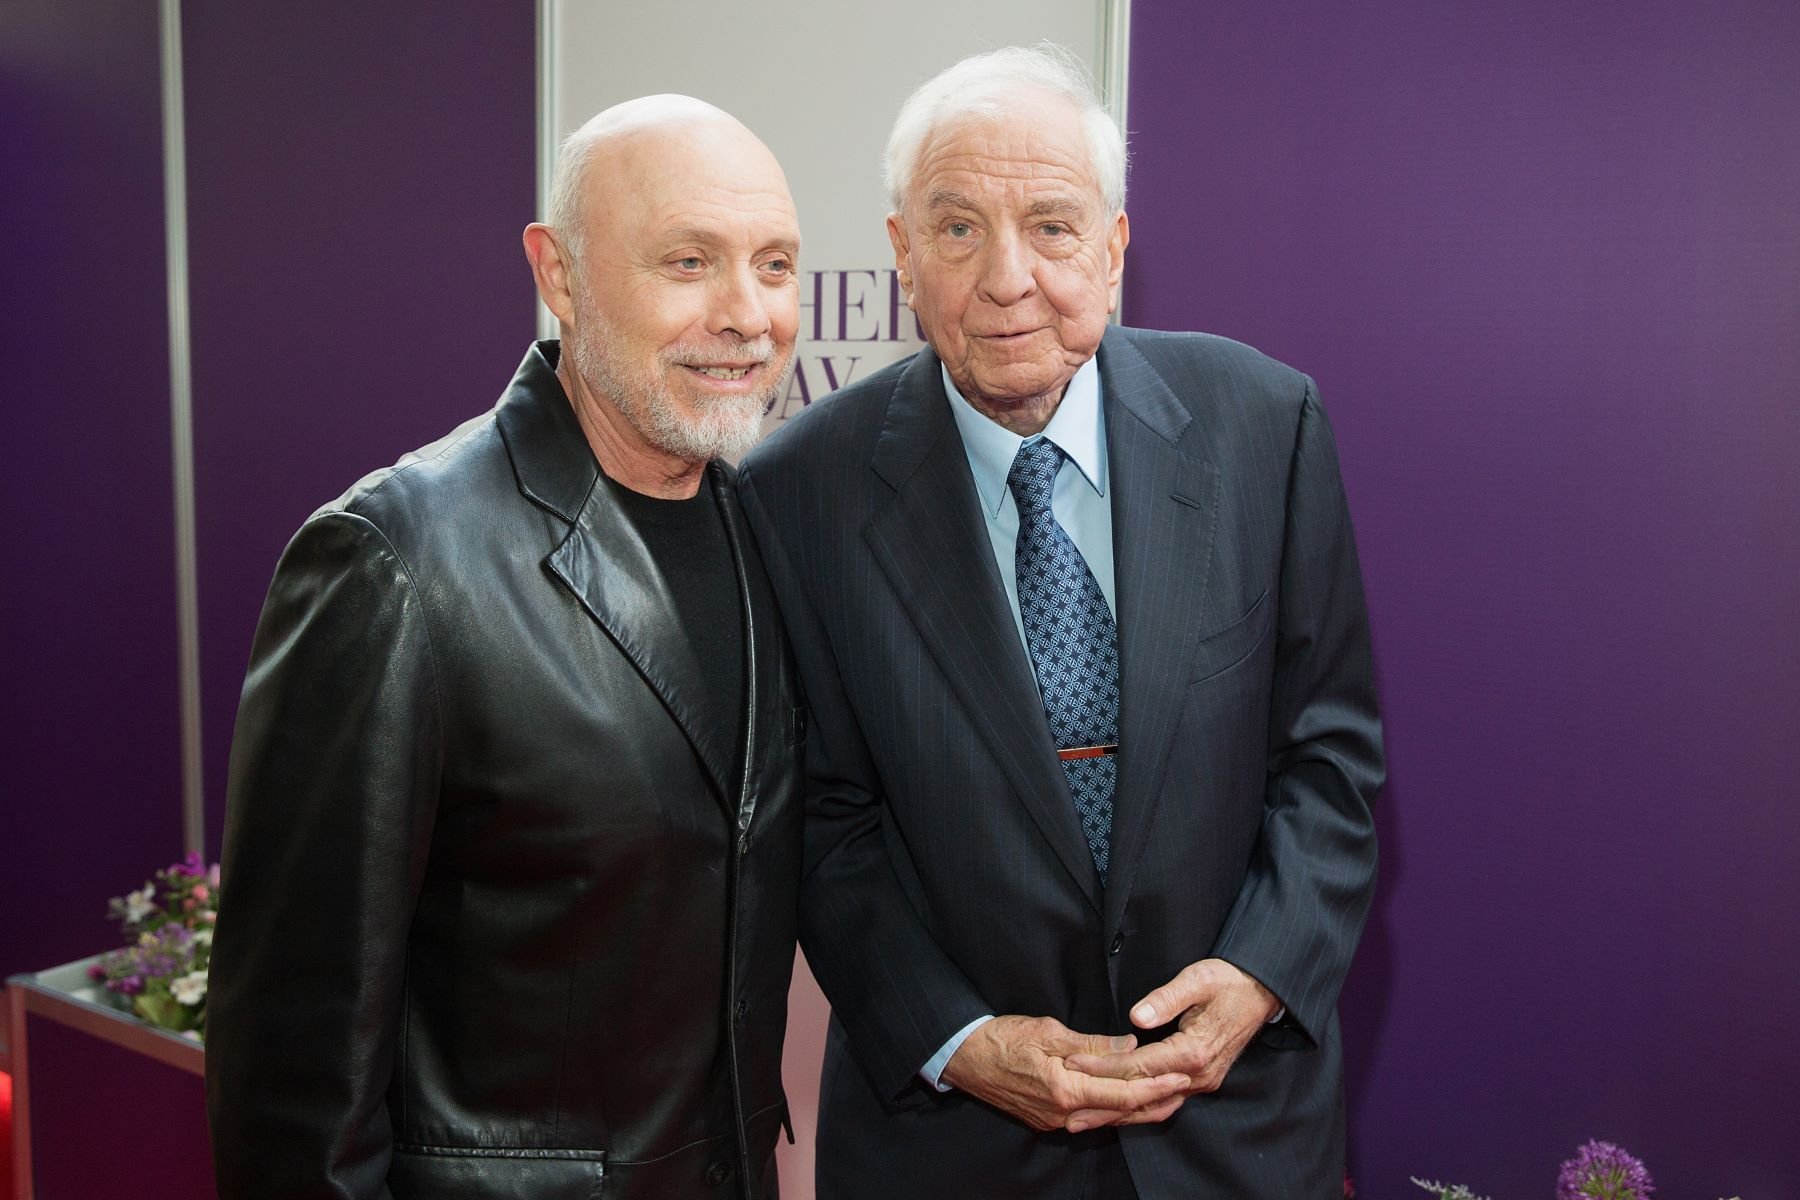 Hector Elizondo and Garry Marshall at the Seattle, Washington, premiere of 'Mother's Day' at the Cinerama Theater